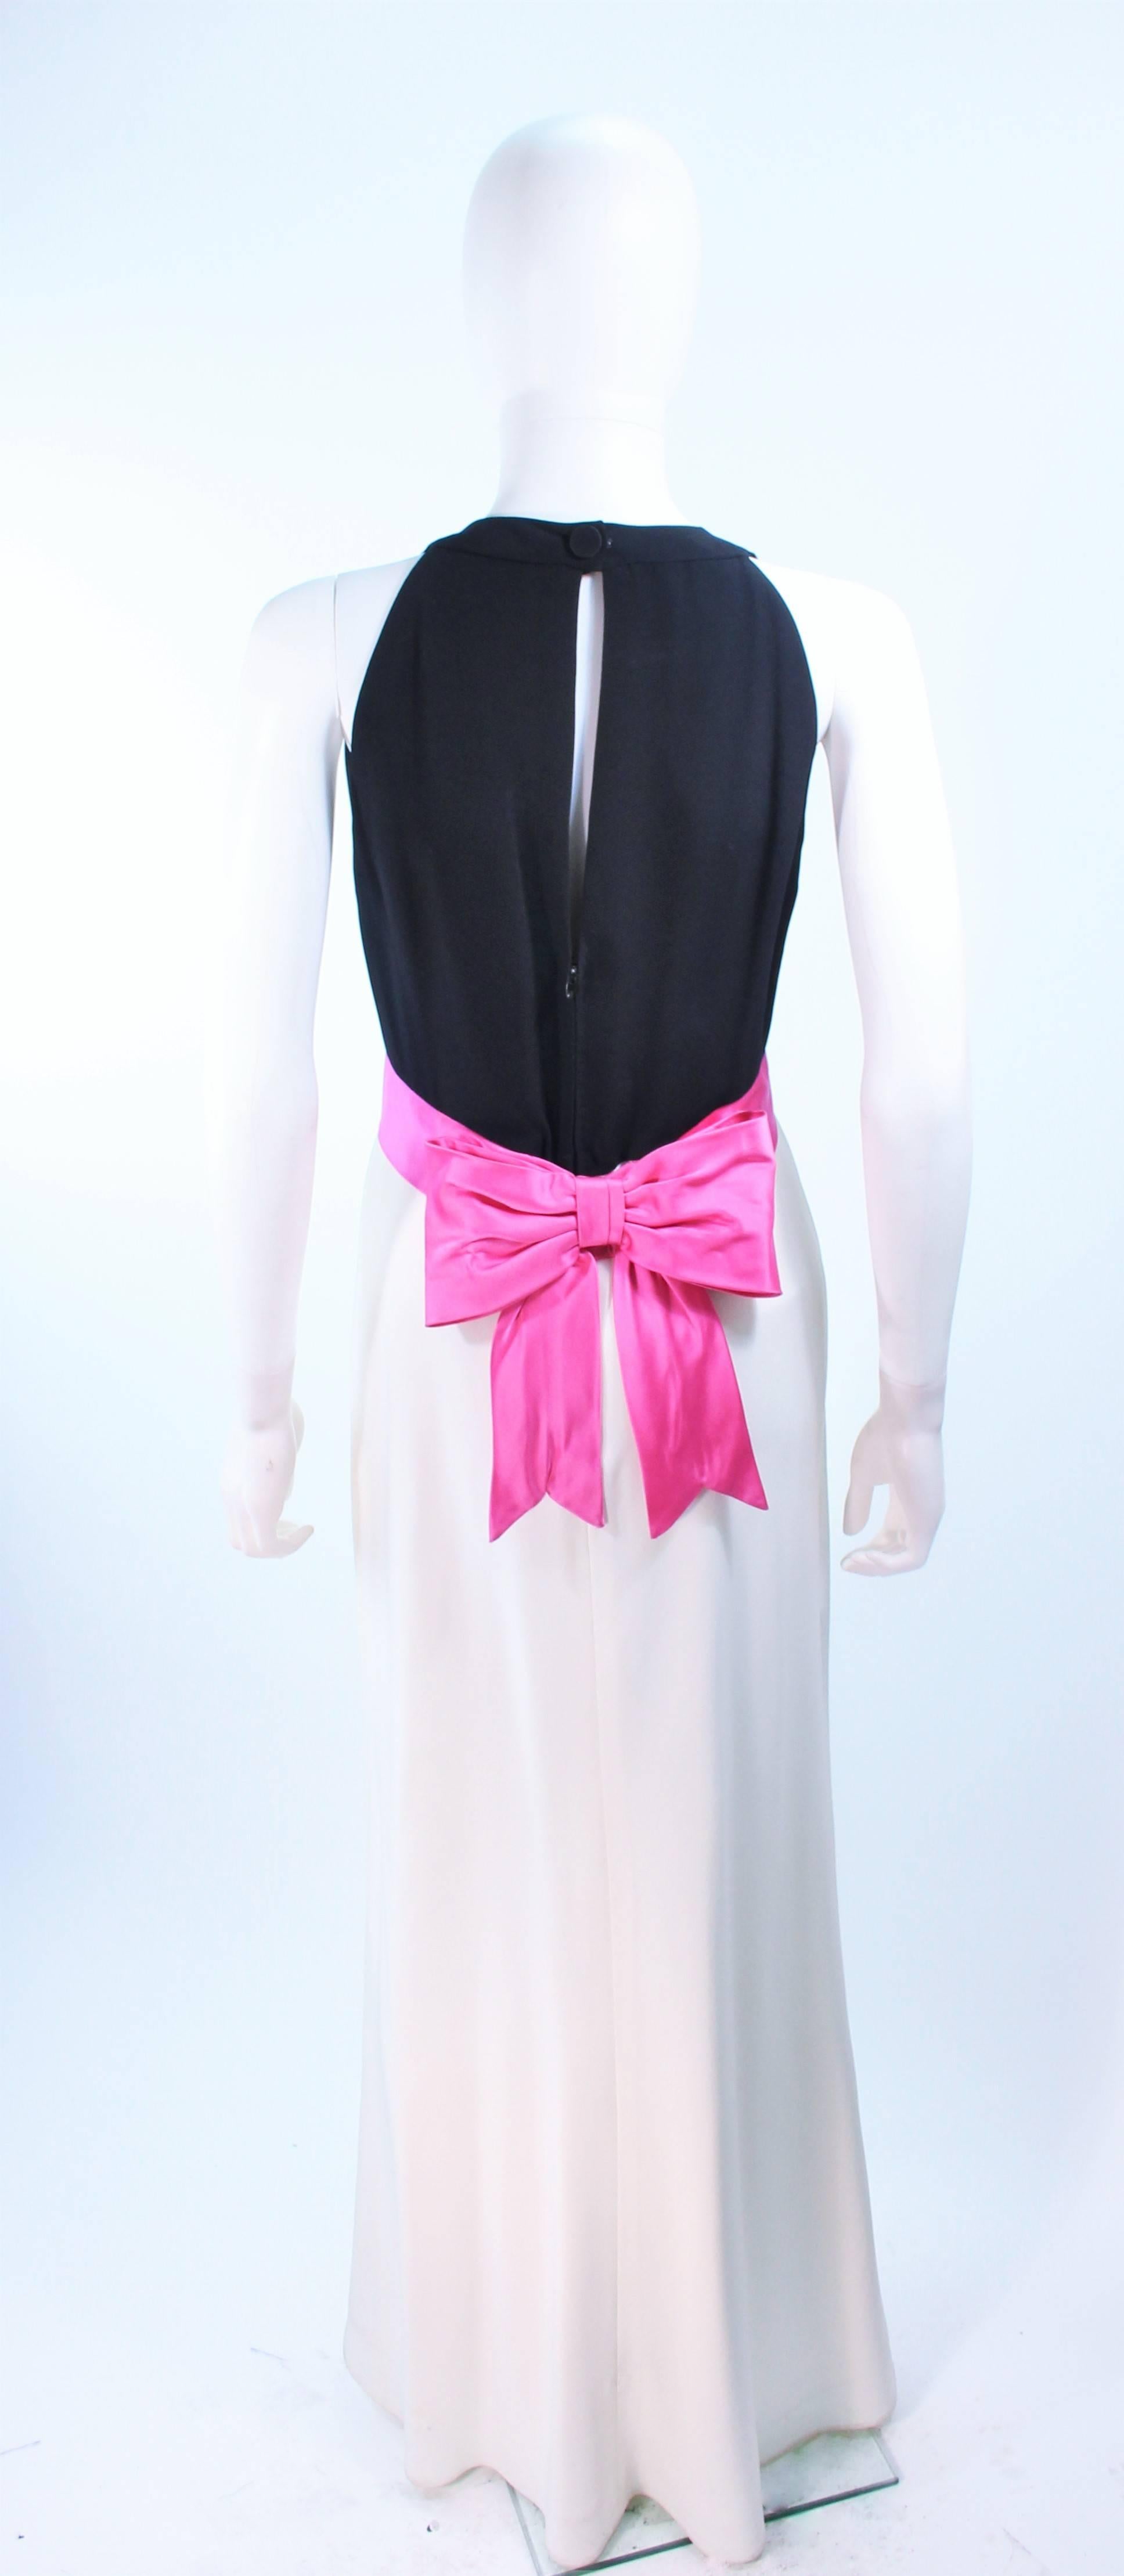 ELIZABETH ARDEN Black Pink Cream Gown with Satin Bow Bias Skirt Size 8  For Sale 1